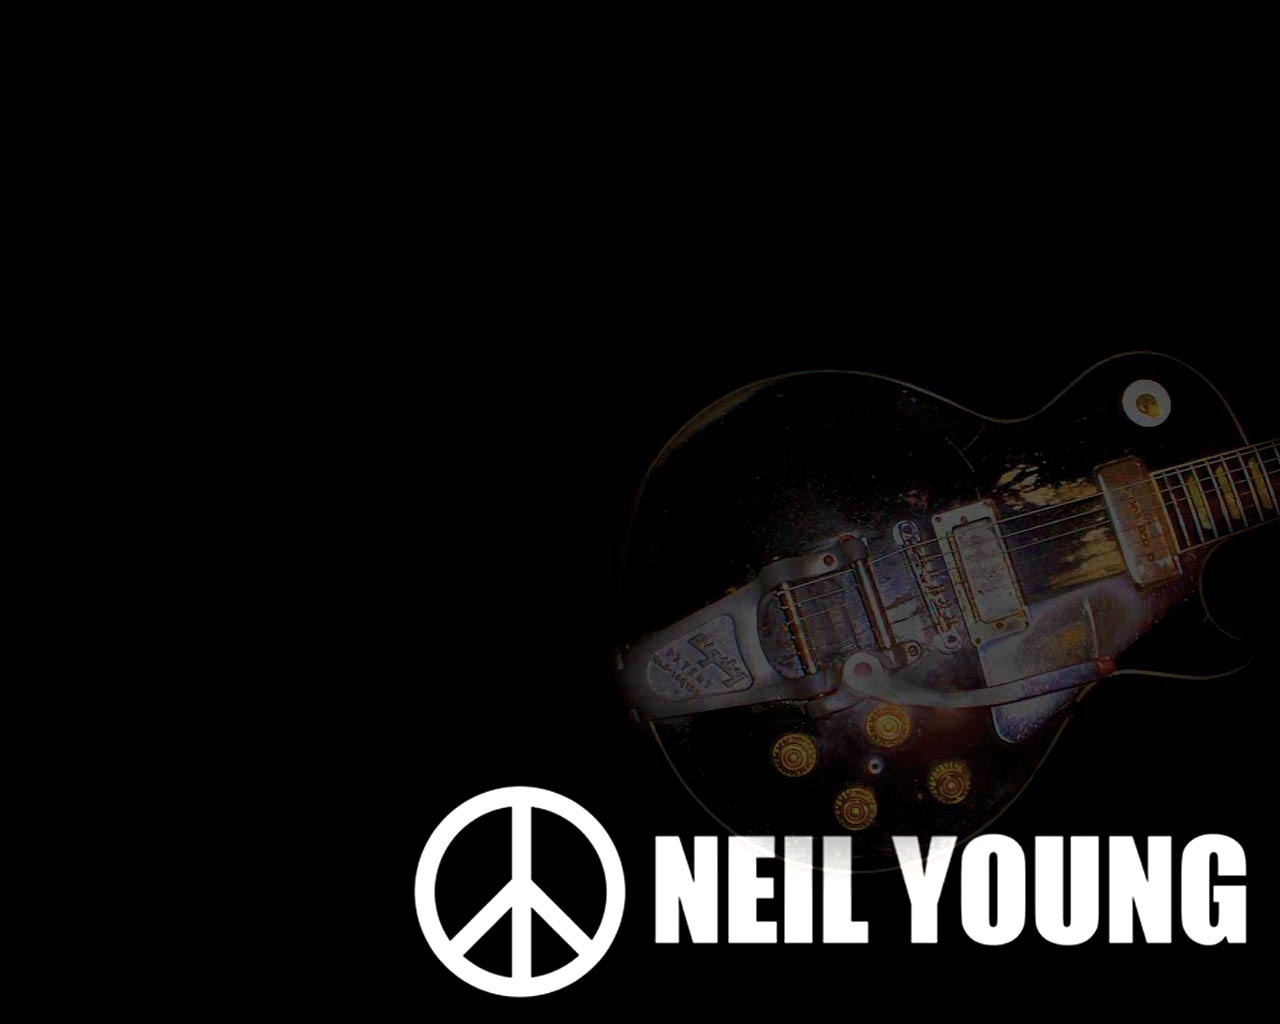 Neil Young Image HD Wallpaper And Background